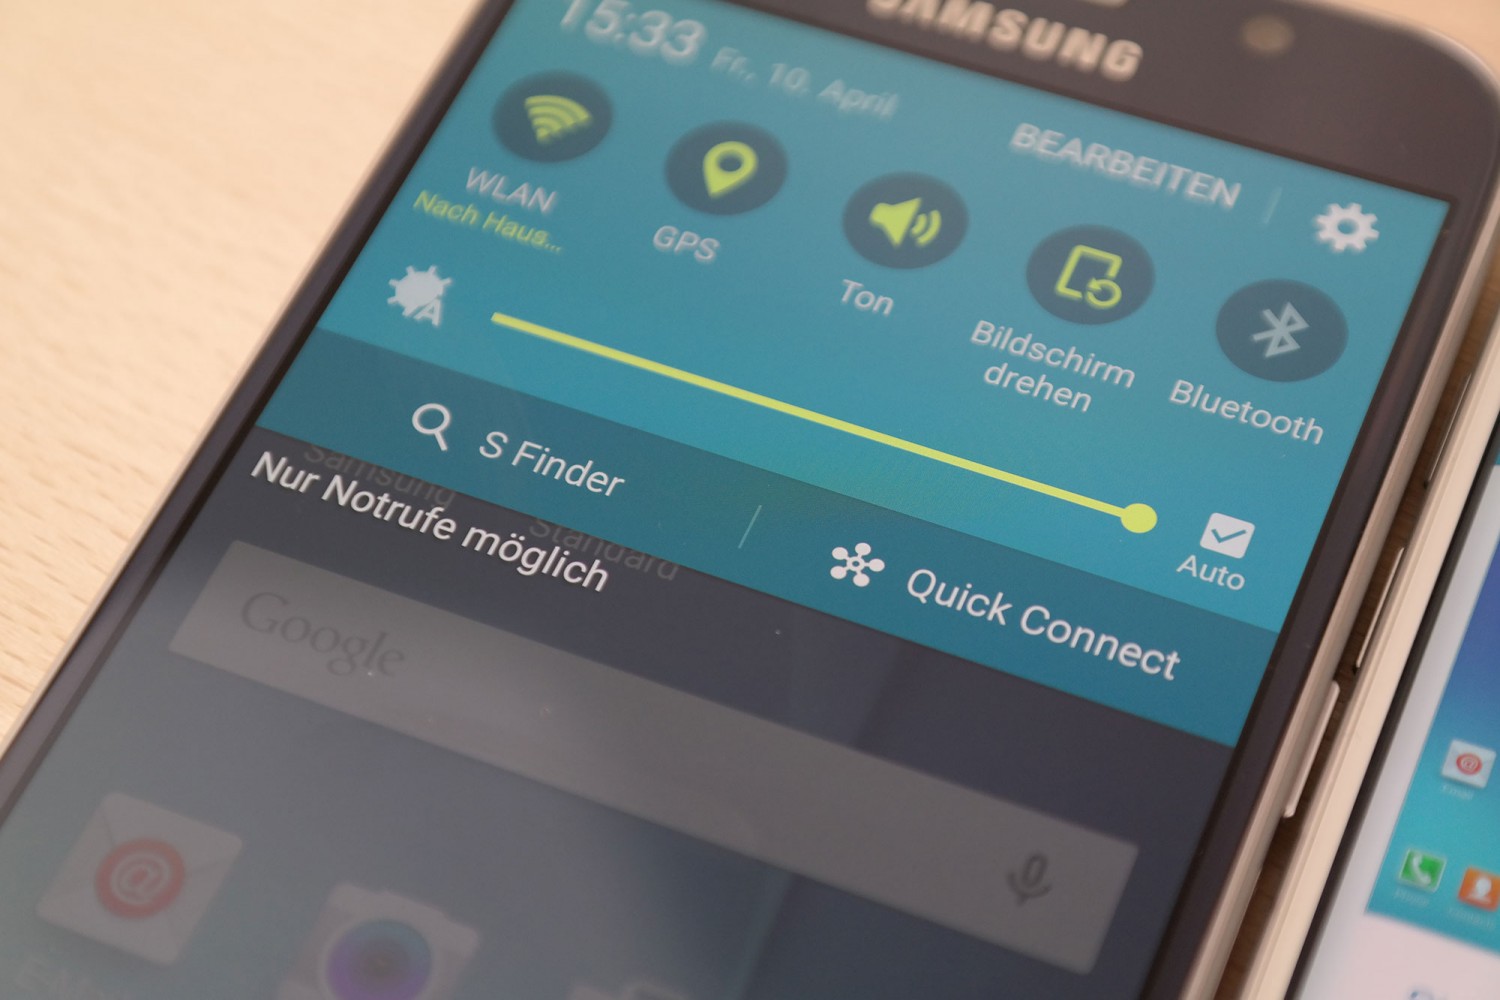 trackphone samsung galaxy s6 software update from pc